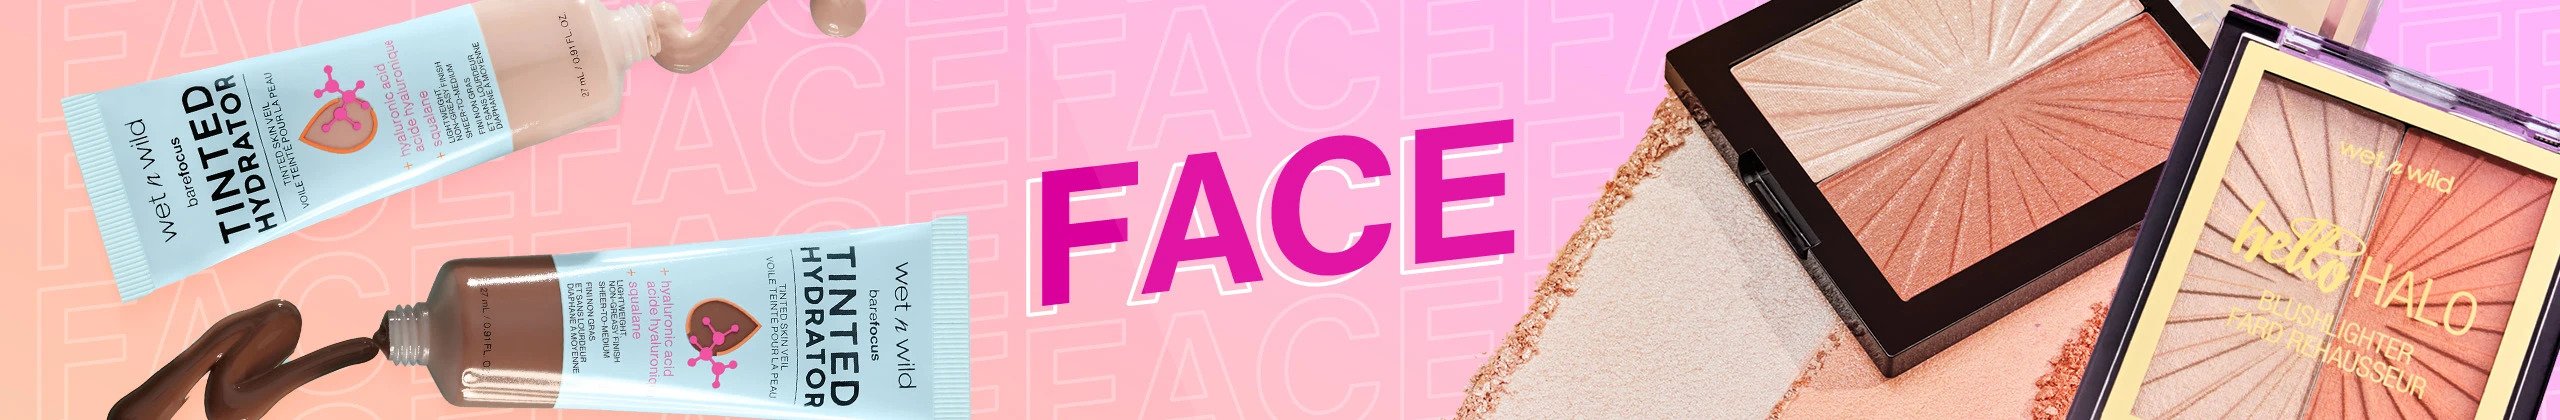 Face Category Banner